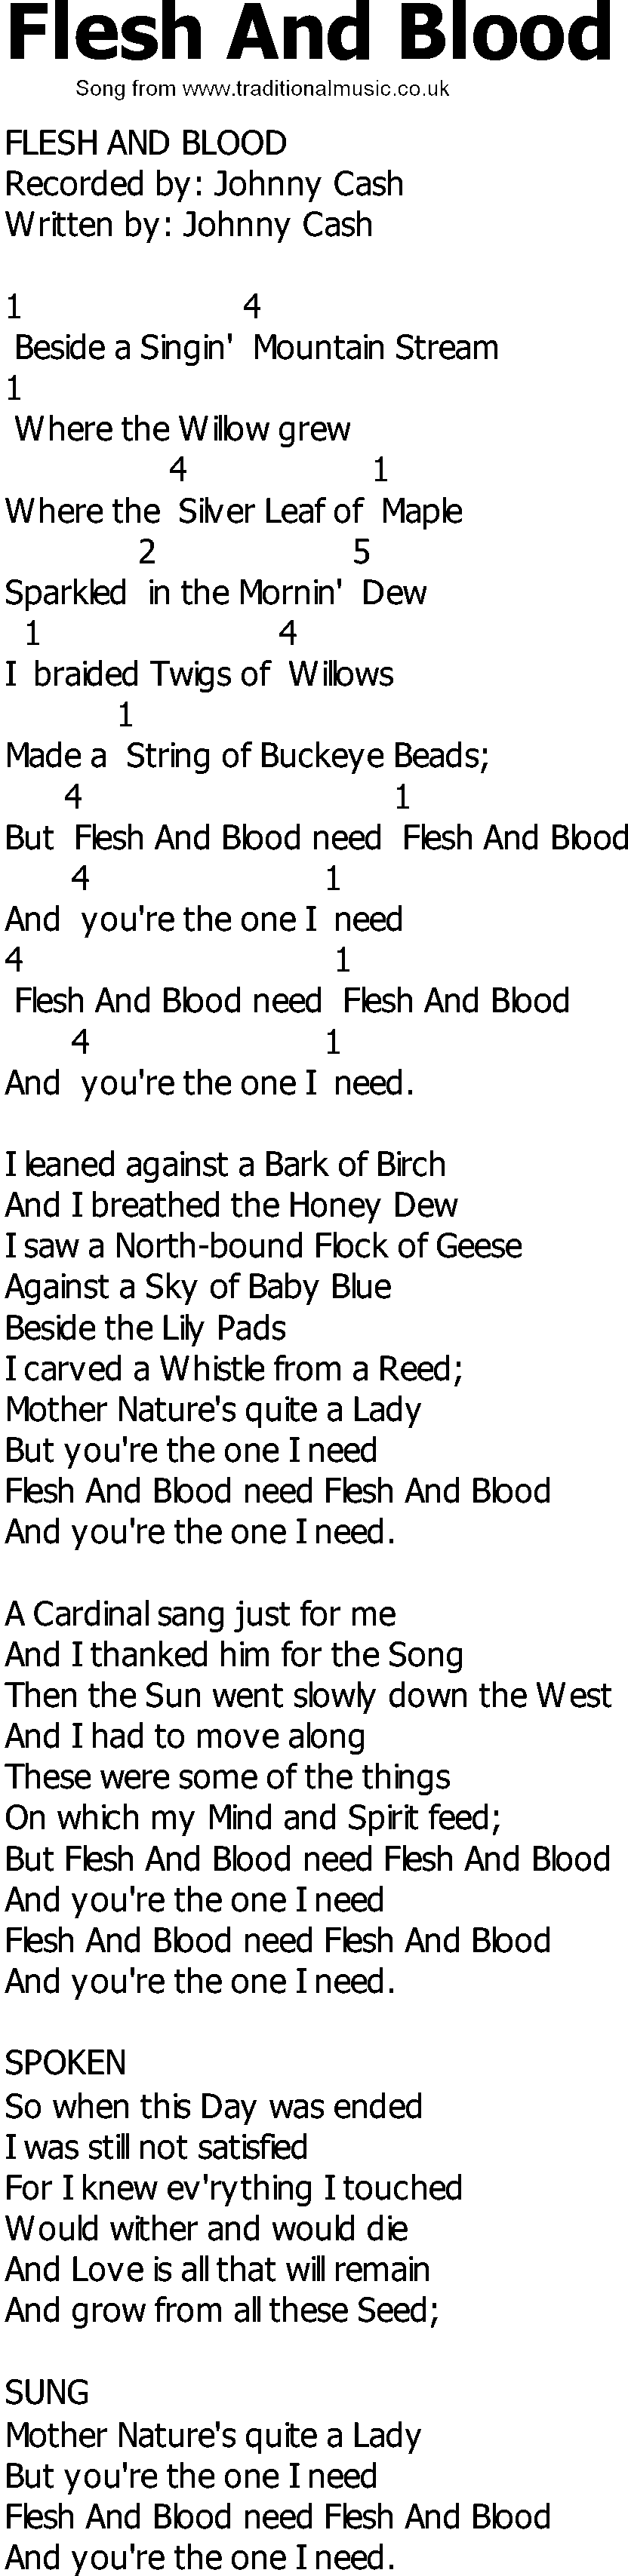 Old Country song lyrics with chords - Flesh And Blood